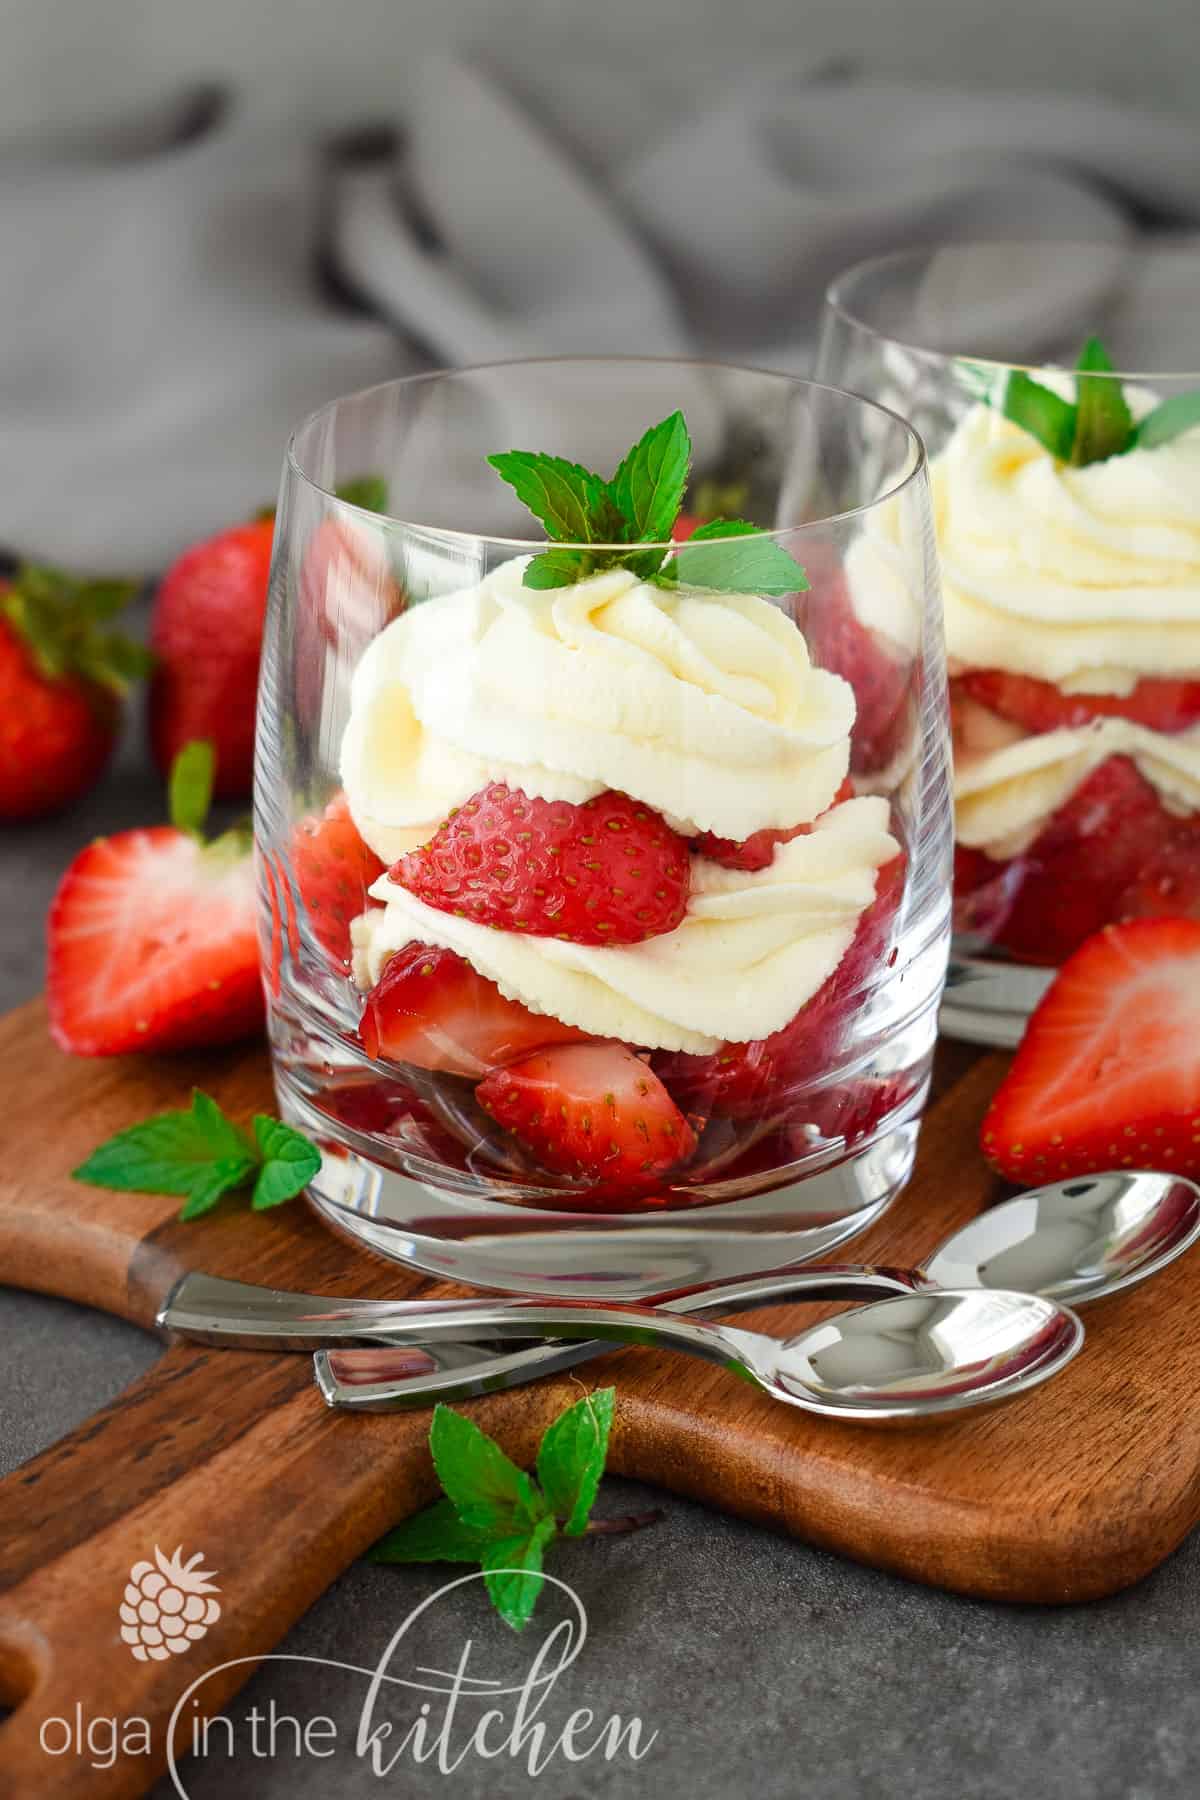 Strawberries and Cream Dessert: sugared fresh strawberries and a vanilla-flavored sweetened whipped cream make up this easy and delicious no-bake dessert the perfect treat for summer days. The perfect dessert for summer parties! olgainthekitchen.com